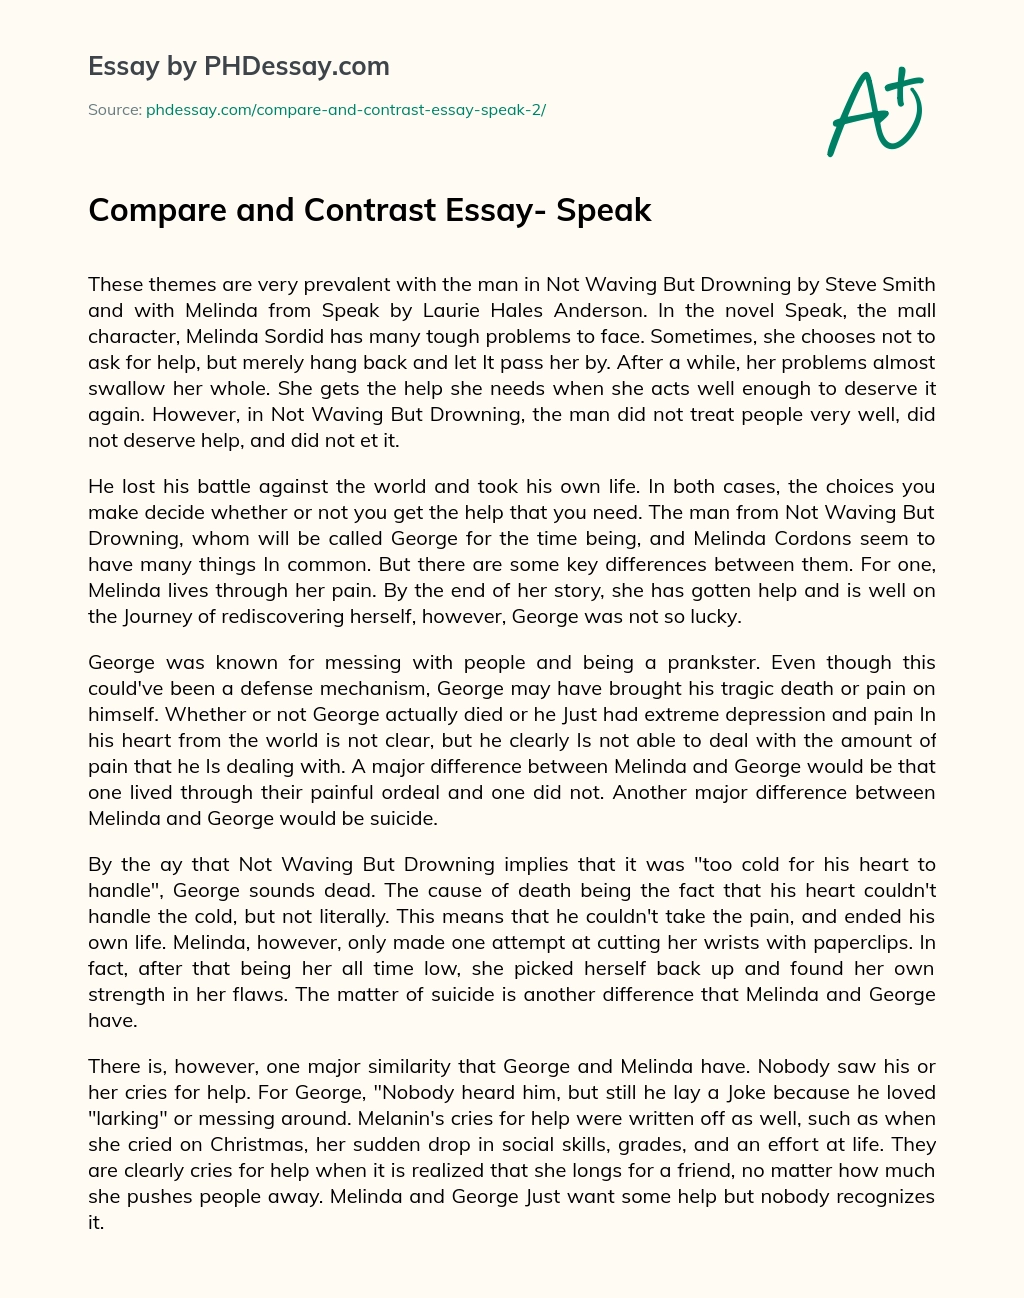 Compare and Contrast Essay- Speak essay